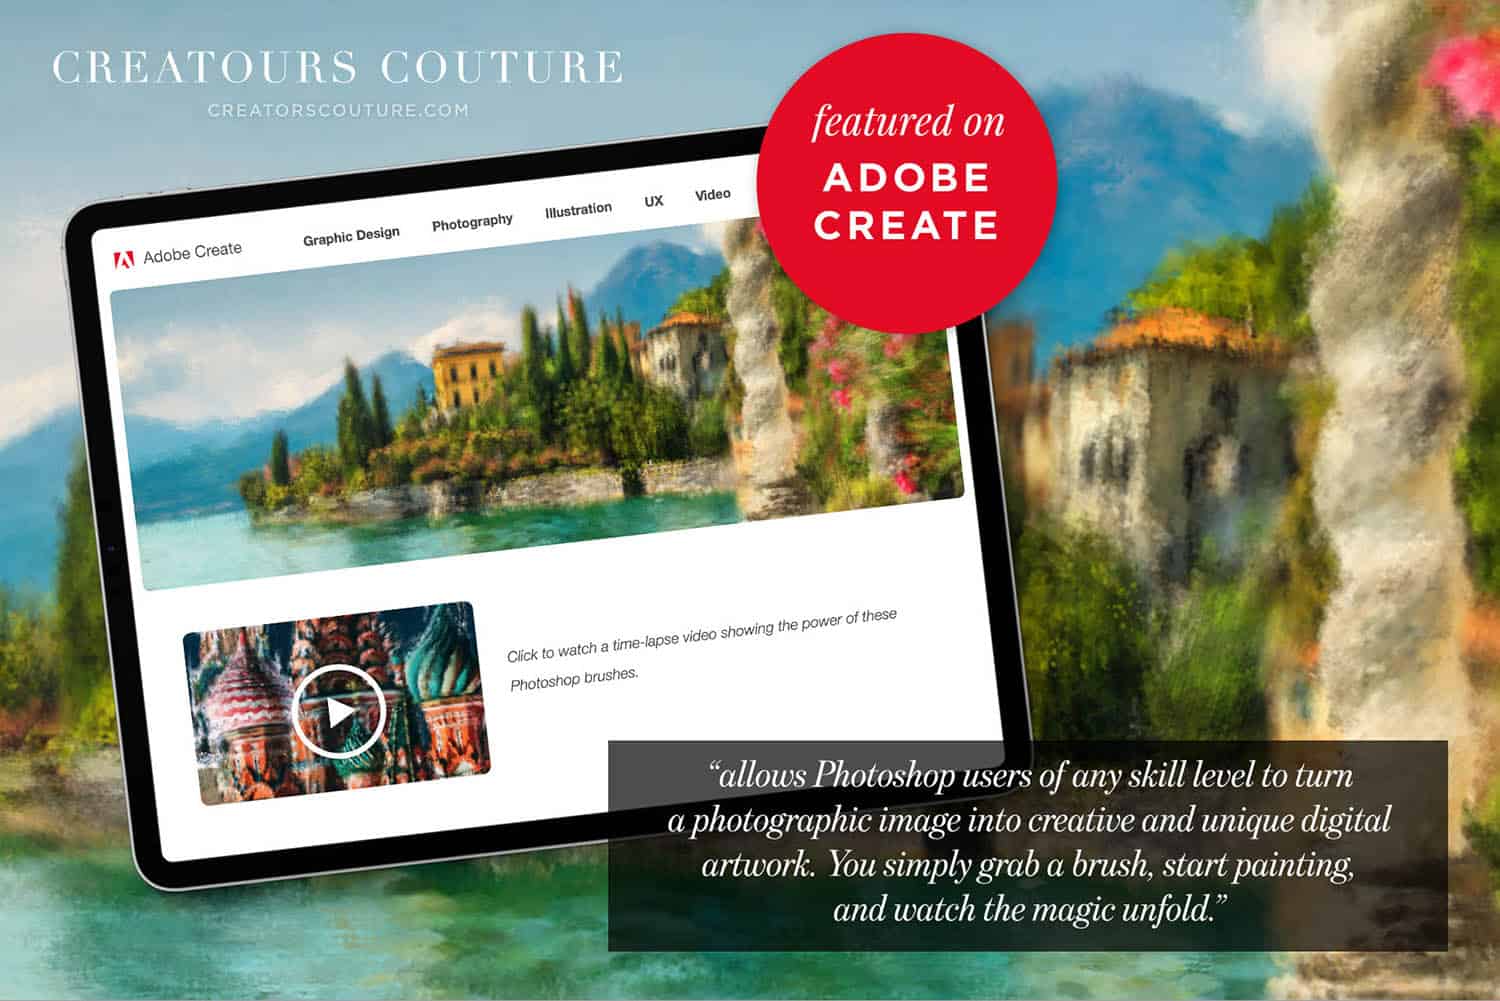 This explainer image for Creators Couture outlines the advantages of using FREE Photoshop brushes to create Impressionist-like paintings